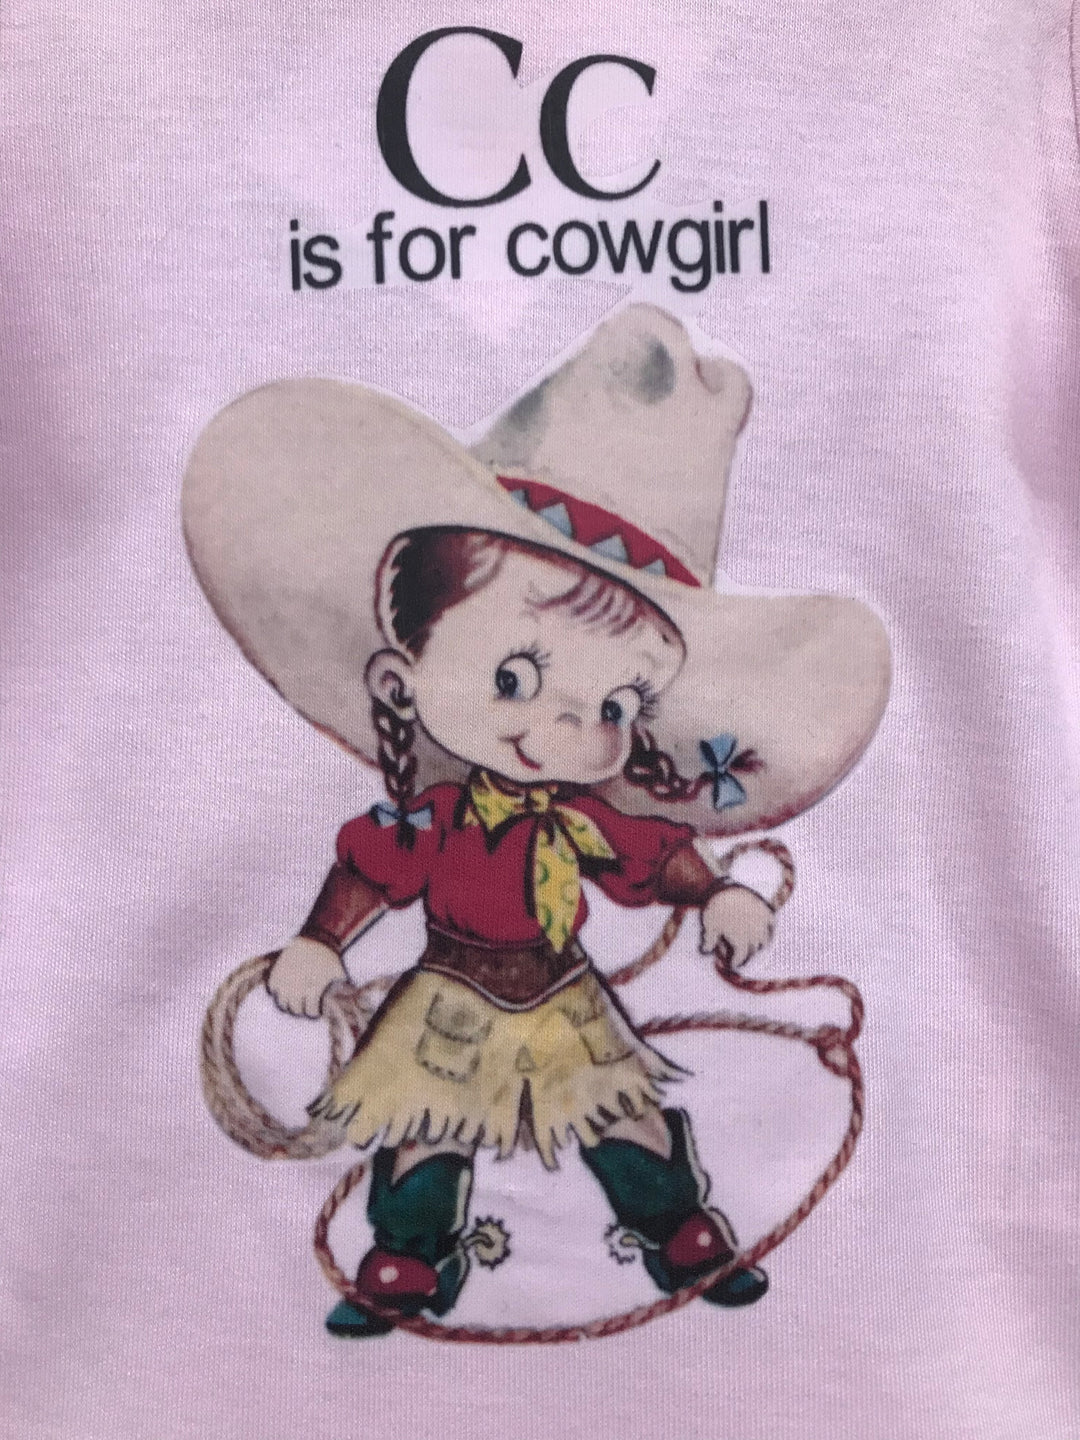 Cc is for Cowgirl Onesie